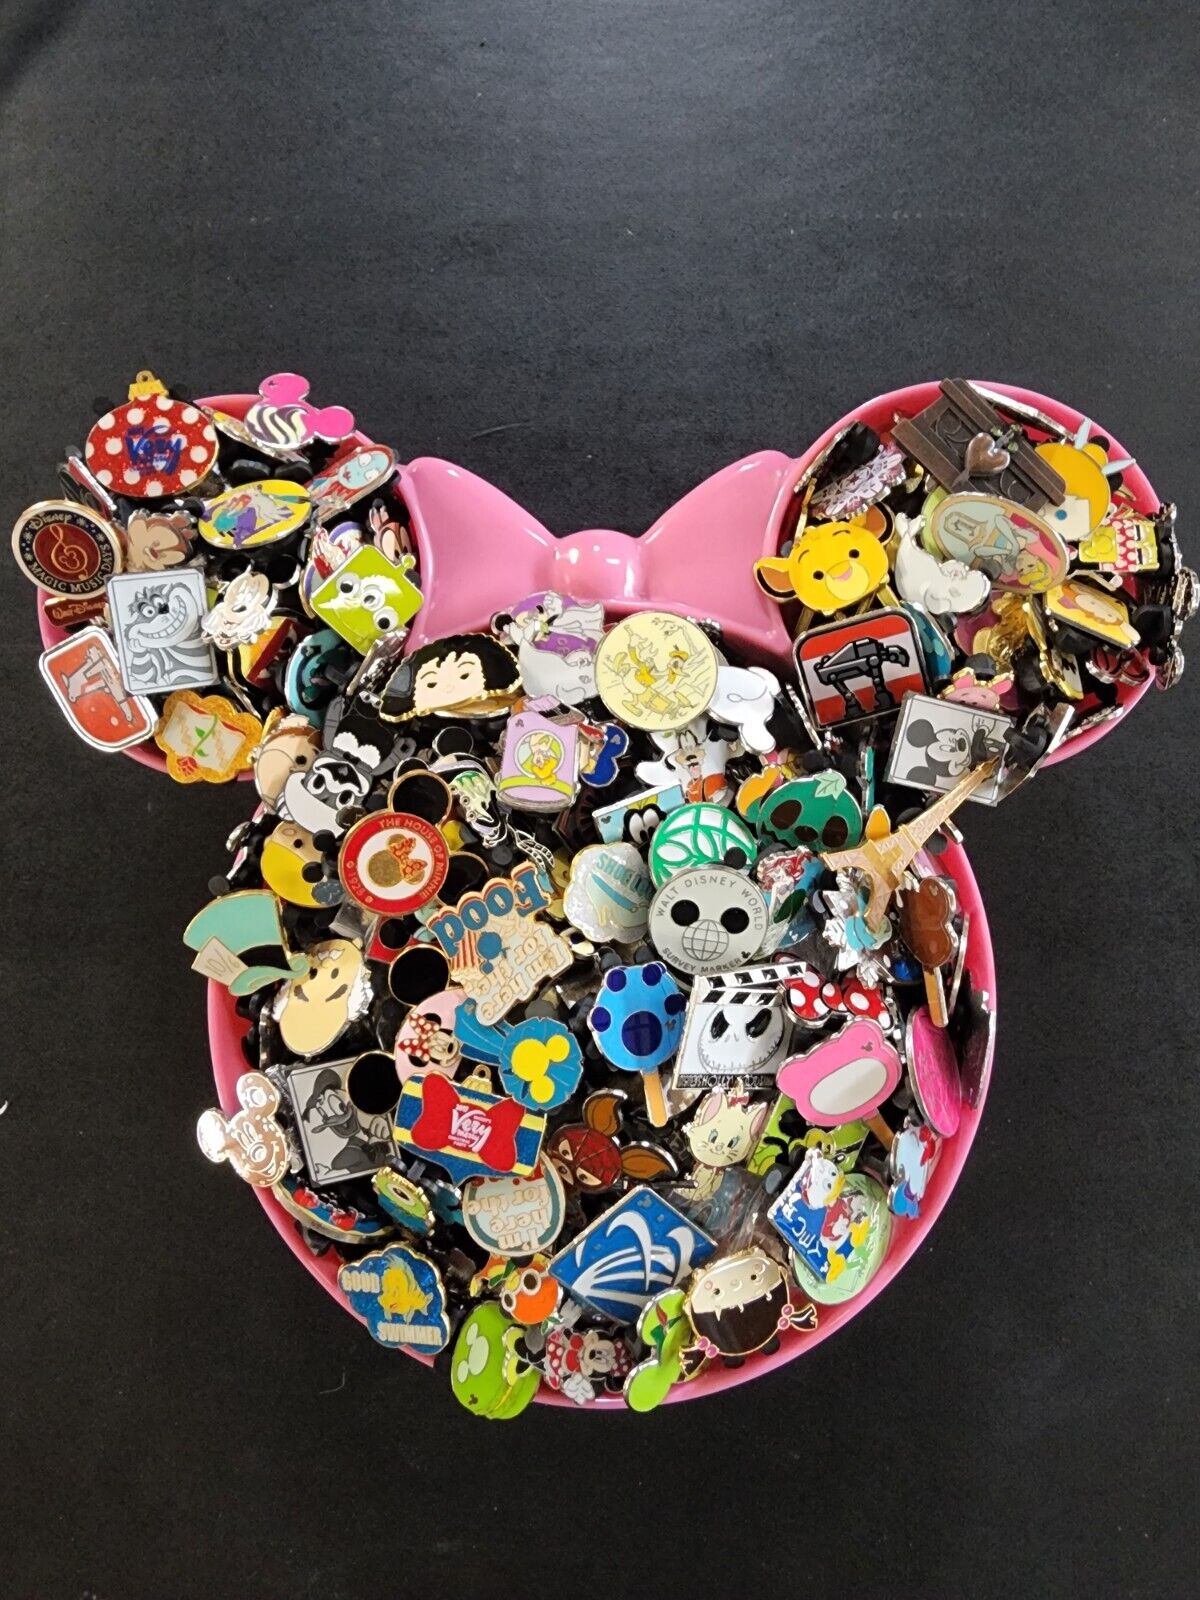 DISNEY PIN TRADING LOT 100, NO DOUBLES, FREE PRIORITY SHIP, TRADABLE